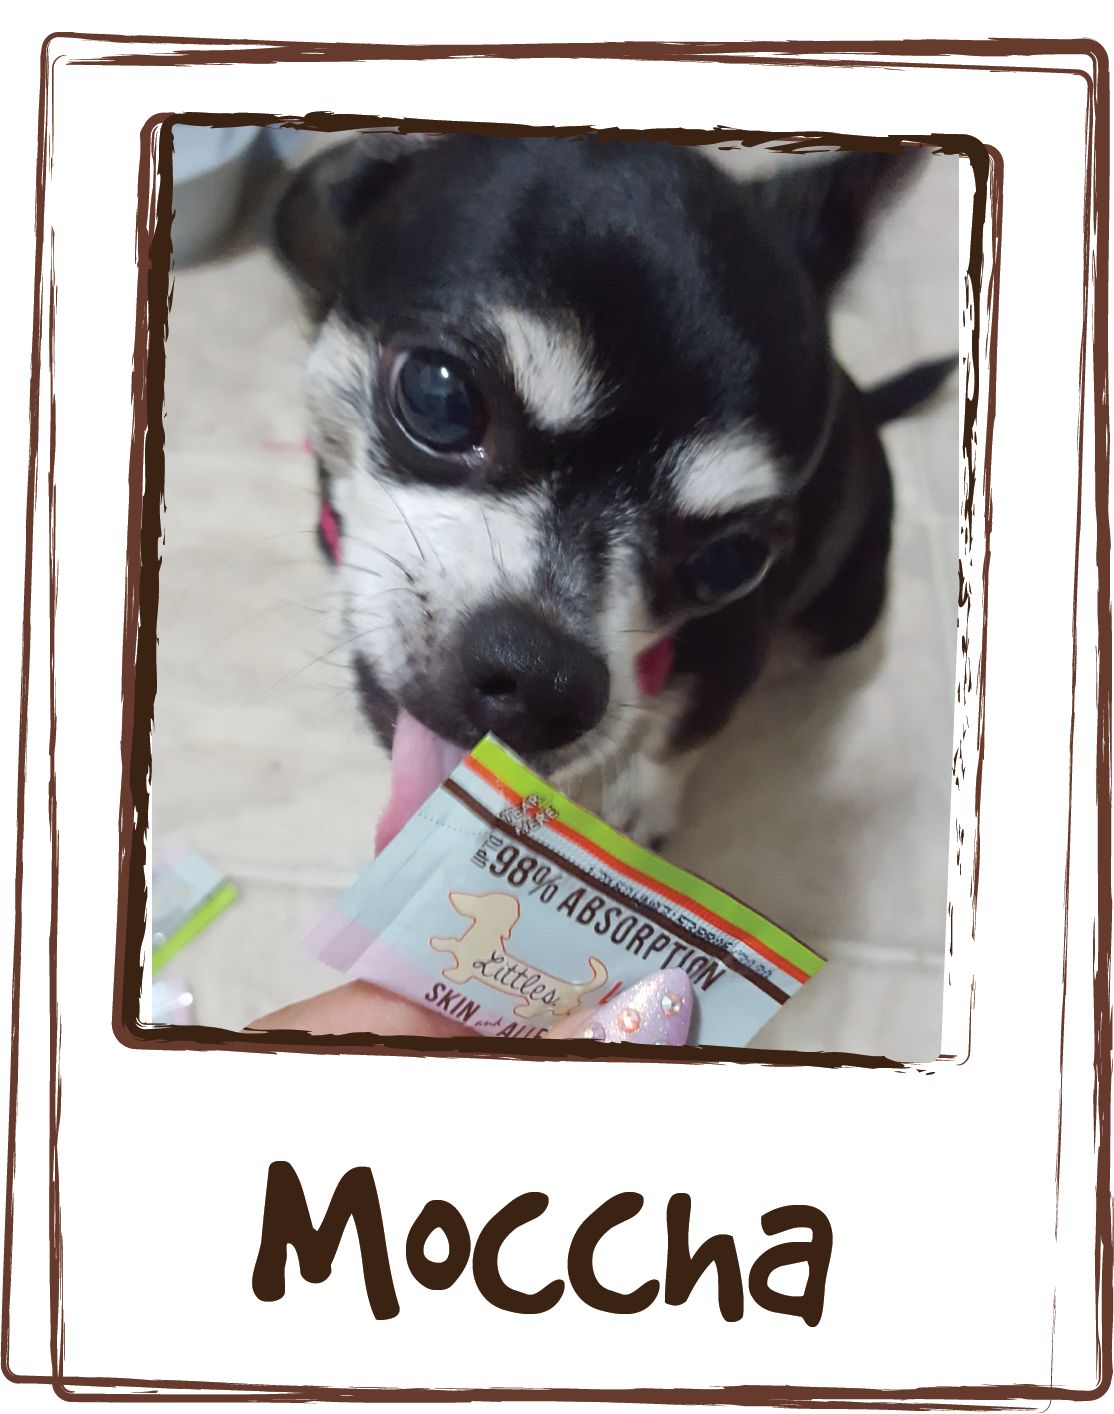  “Hassle free product, highly recommended. Moccha has very sensitive skin and I tried almost every single product out with no luck until I found Licks.”    